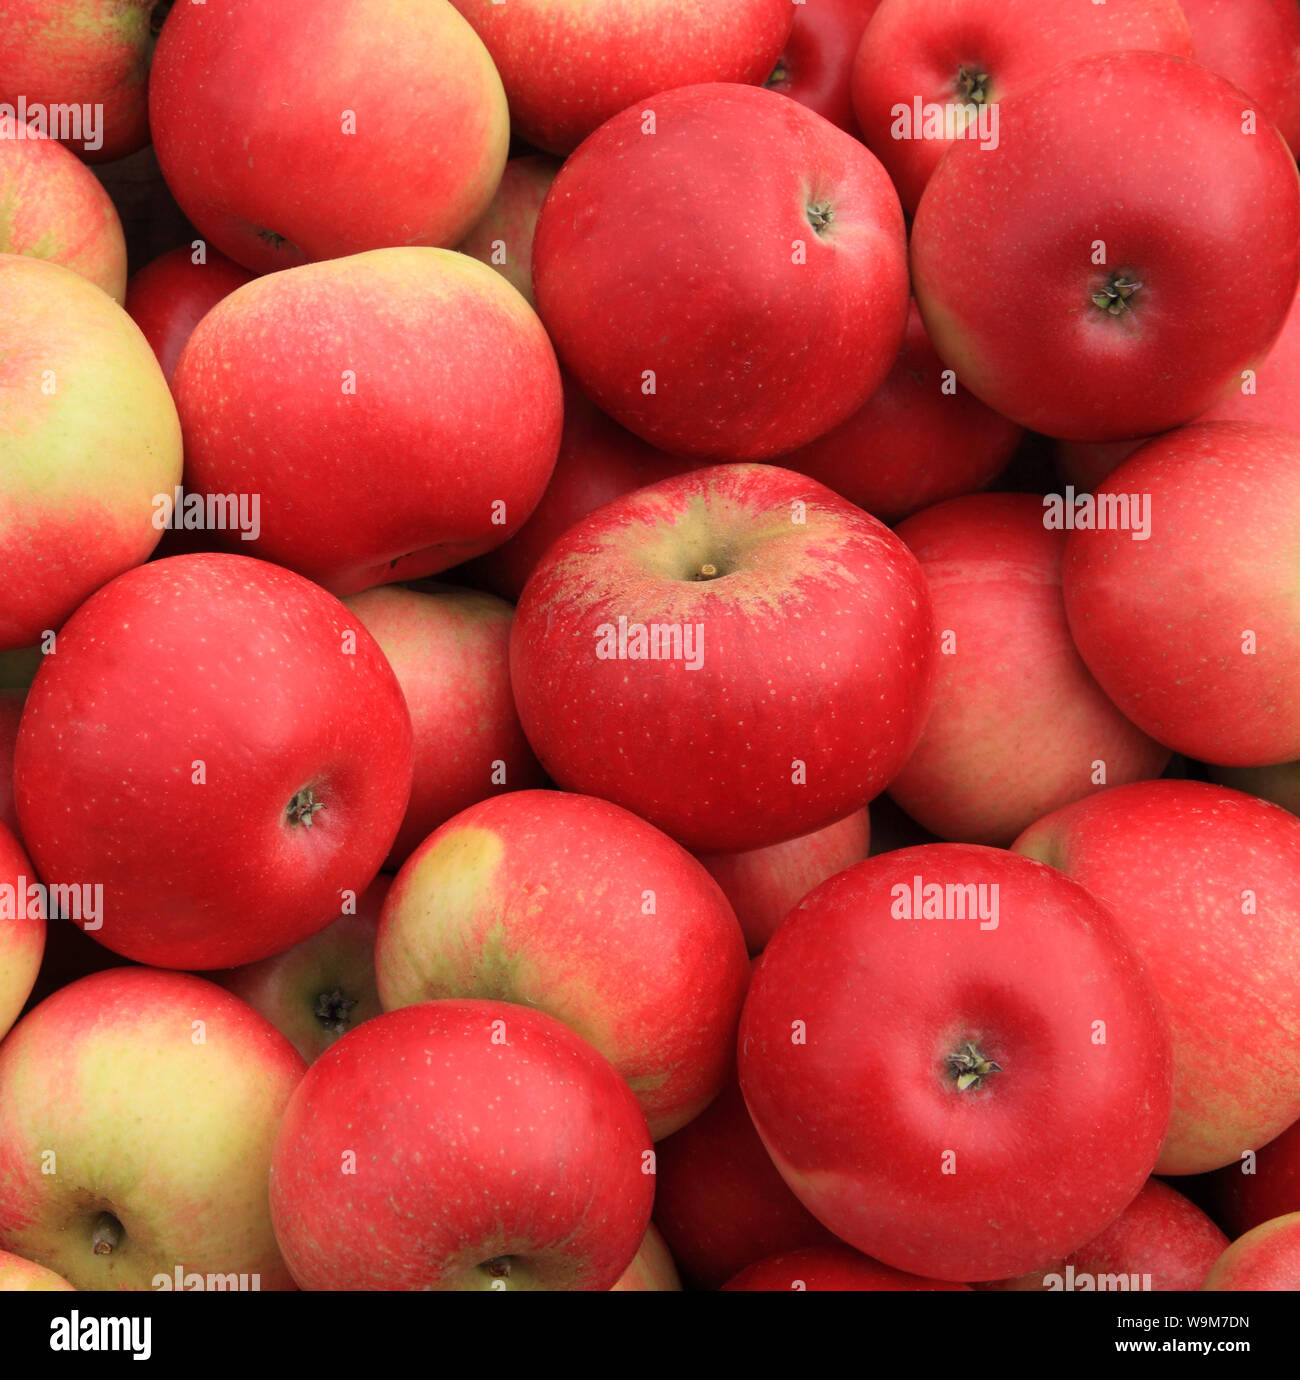 Apple 'Discovery', apples, named variety, varieties, farm shop display Stock Photo